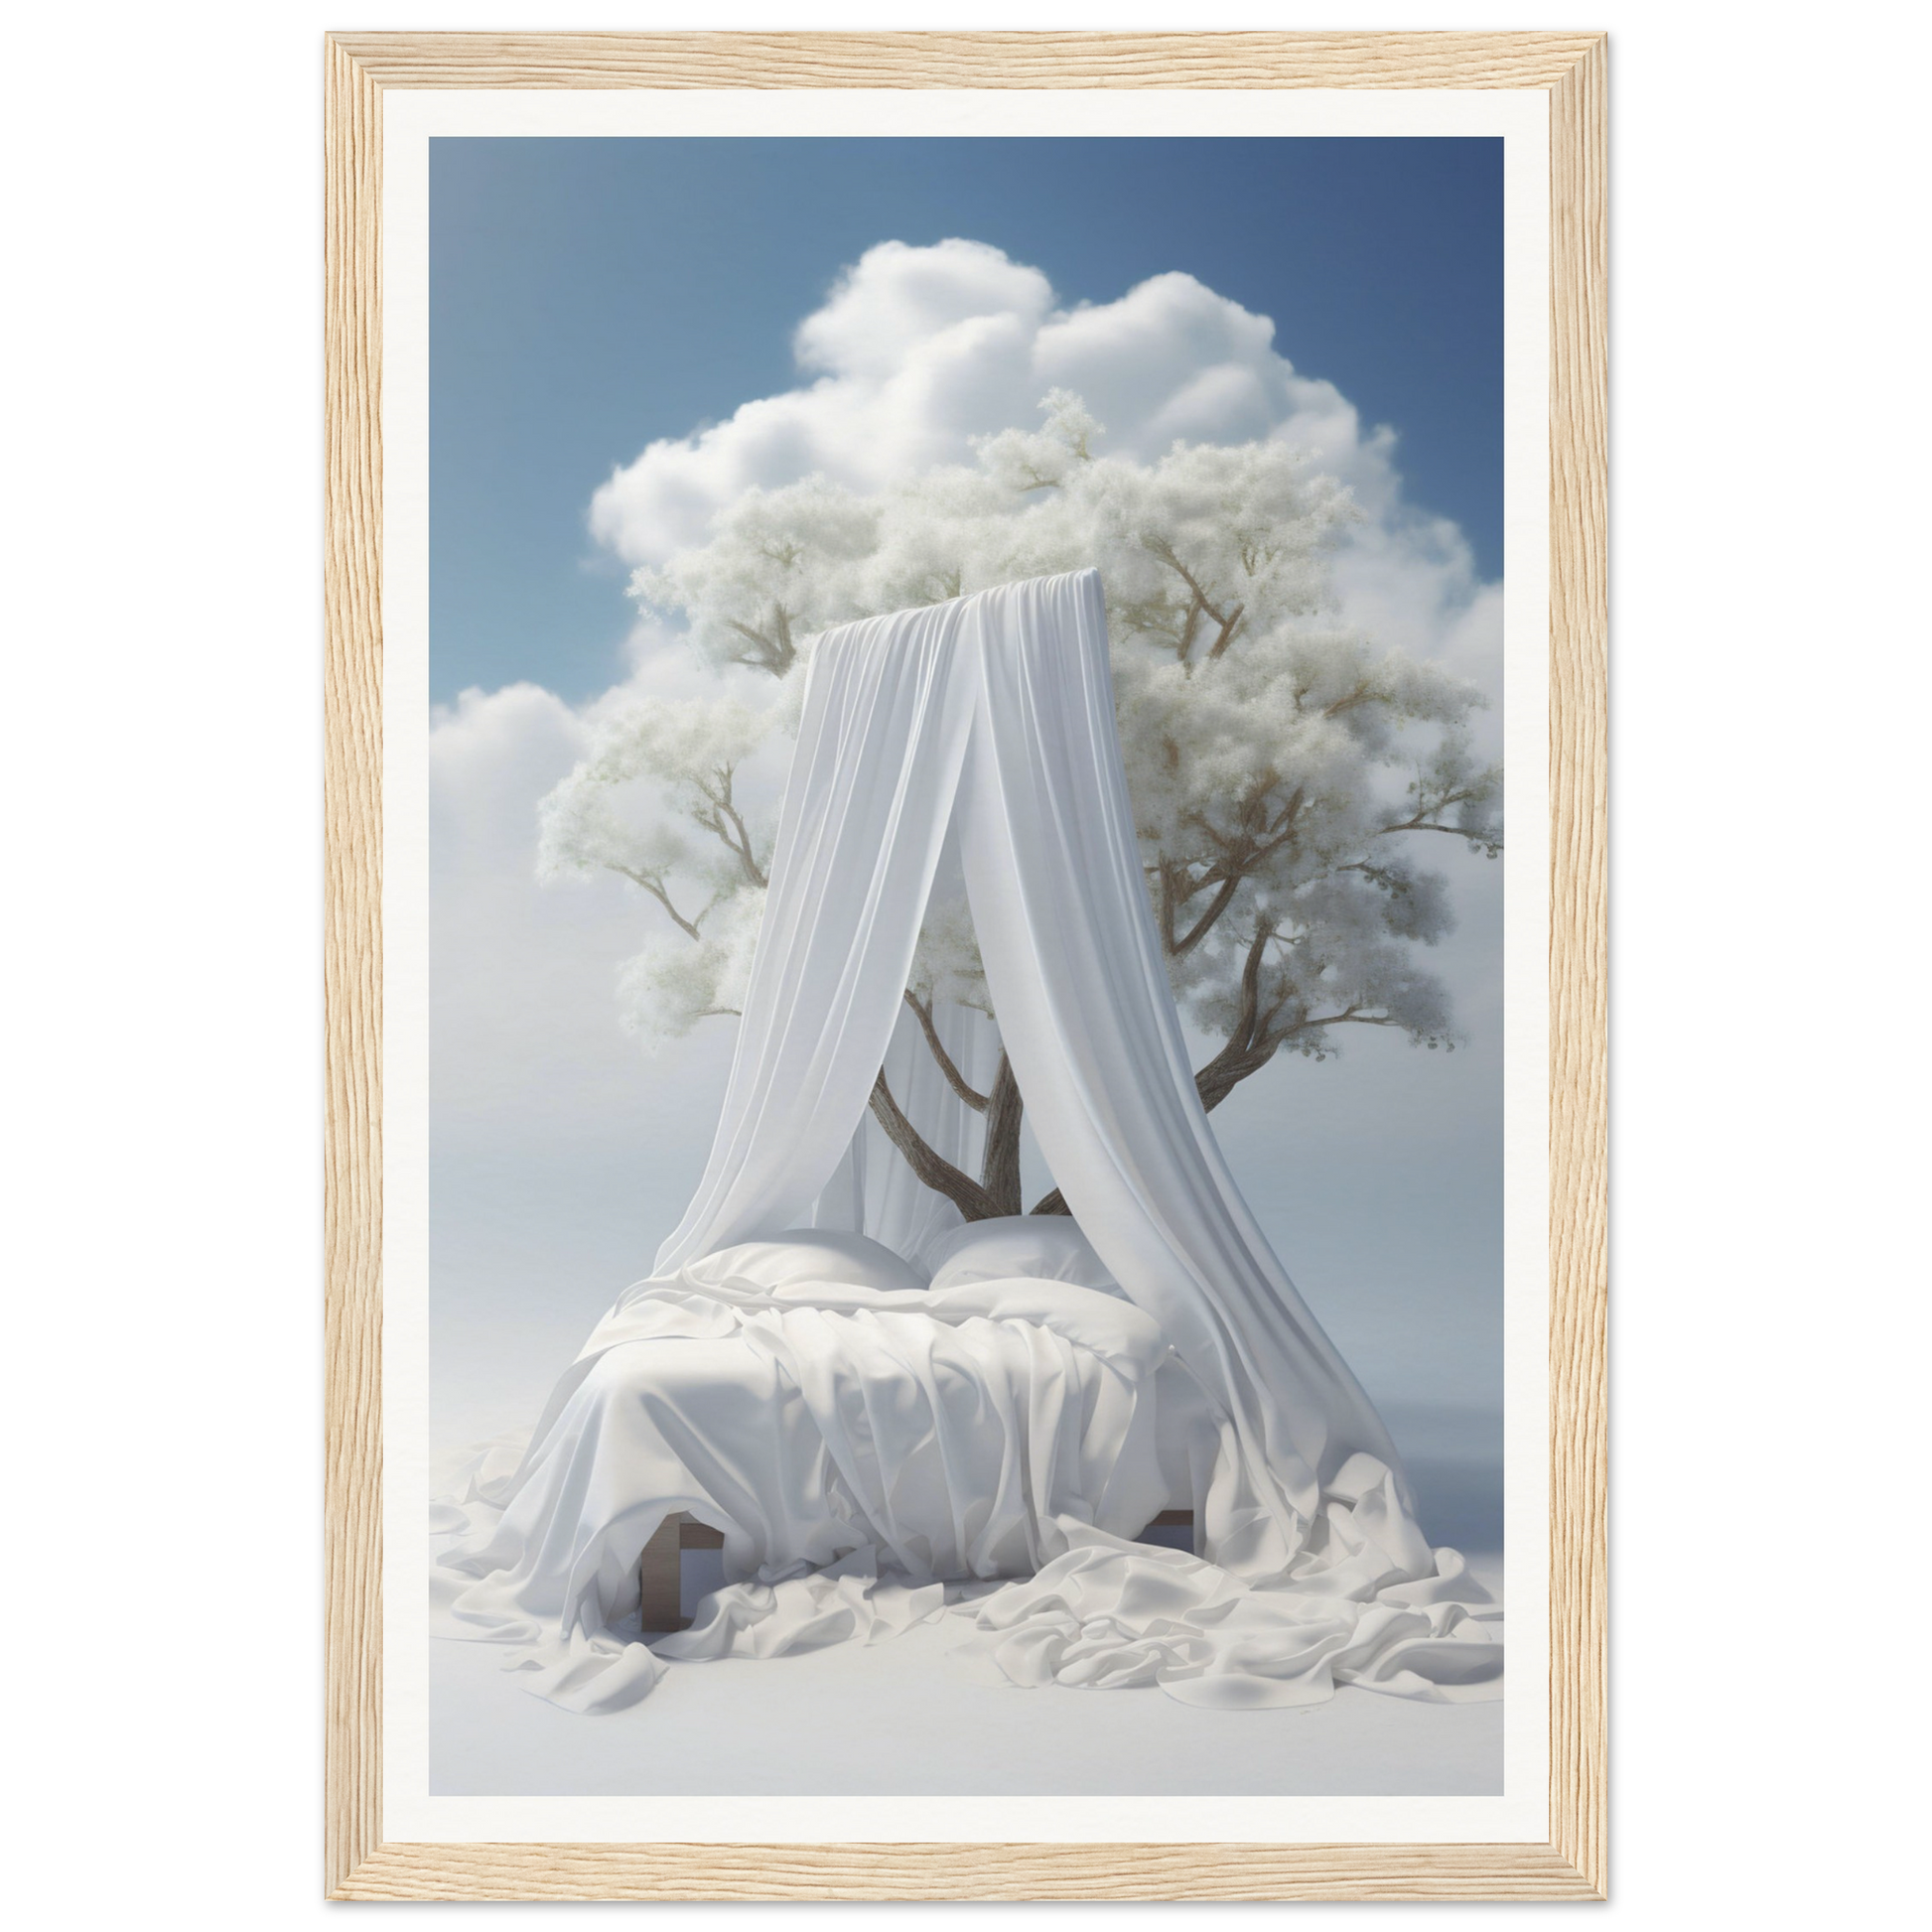 An image of a Paradise Found A The Oracle Windows™ Collection bed with white sheets, perfect for a high quality poster for my wall.